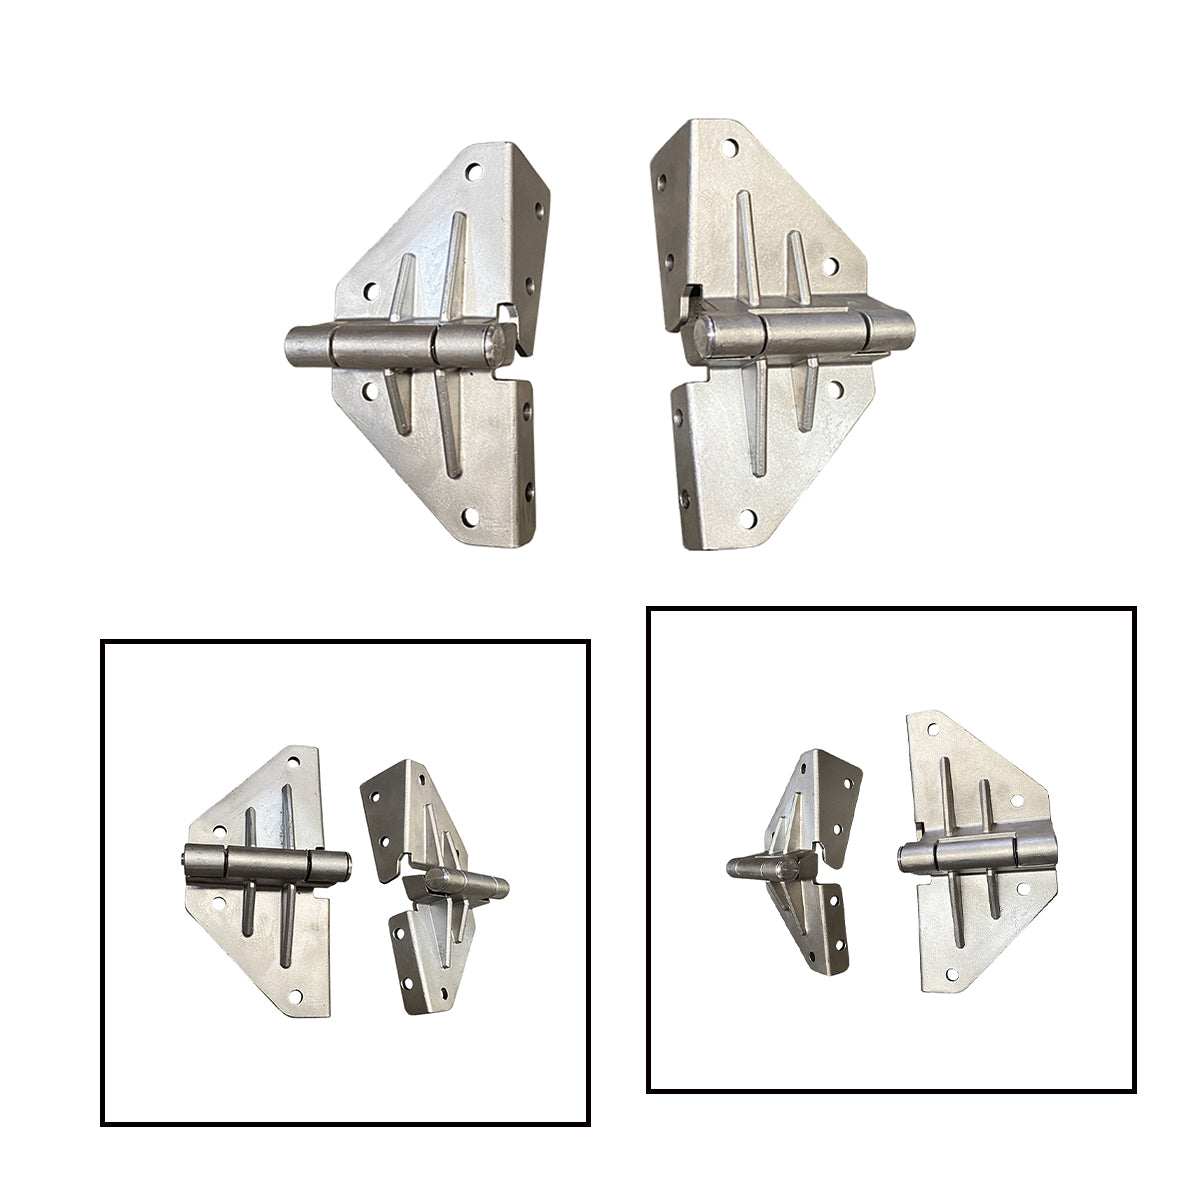 Windshield frame hinges, LH and RH, Stainless Steel, for FJ40, FJ45 Toyota Land Cruiser